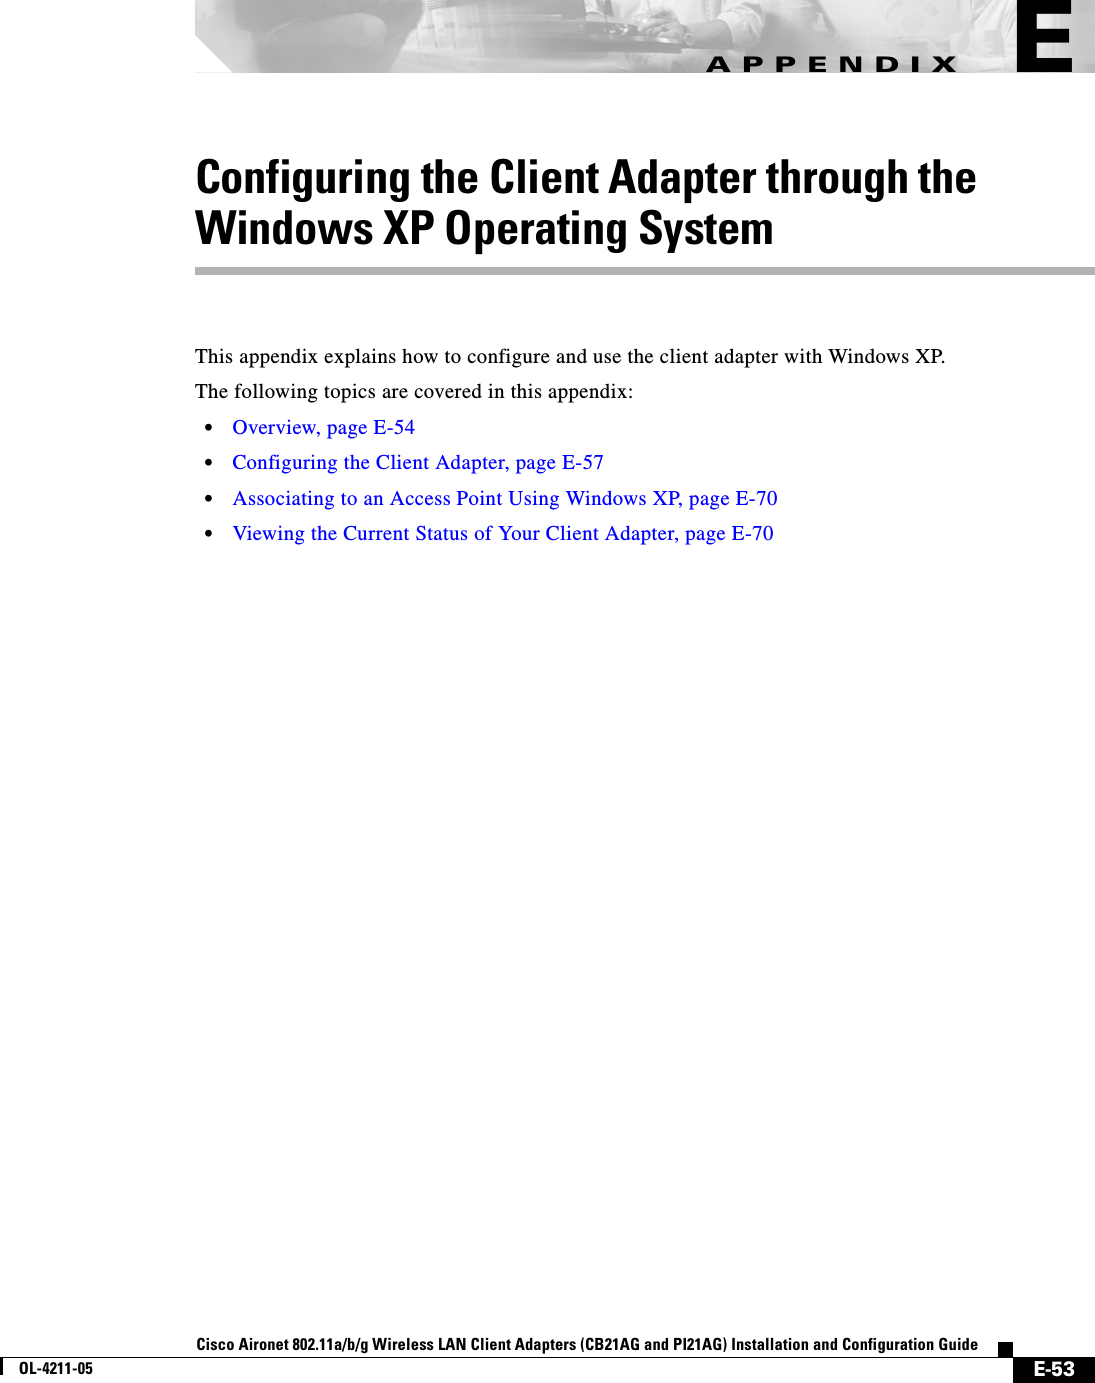 E-53Cisco Aironet 802.11a/b/g Wireless LAN Client Adapters (CB21AG and PI21AG) Installation and Configuration GuideOL-4211-05APPENDIXEConfiguring the Client Adapter through theWindows XP Operating SystemThis appendix explains how to configure and use the client adapter with Windows XP.The following topics are covered in this appendix:•Overview, page E-54•Configuring the Client Adapter, page E-57•Associating to an Access Point Using Windows XP, page E-70•Viewing the Current Status of Your Client Adapter, page E-70